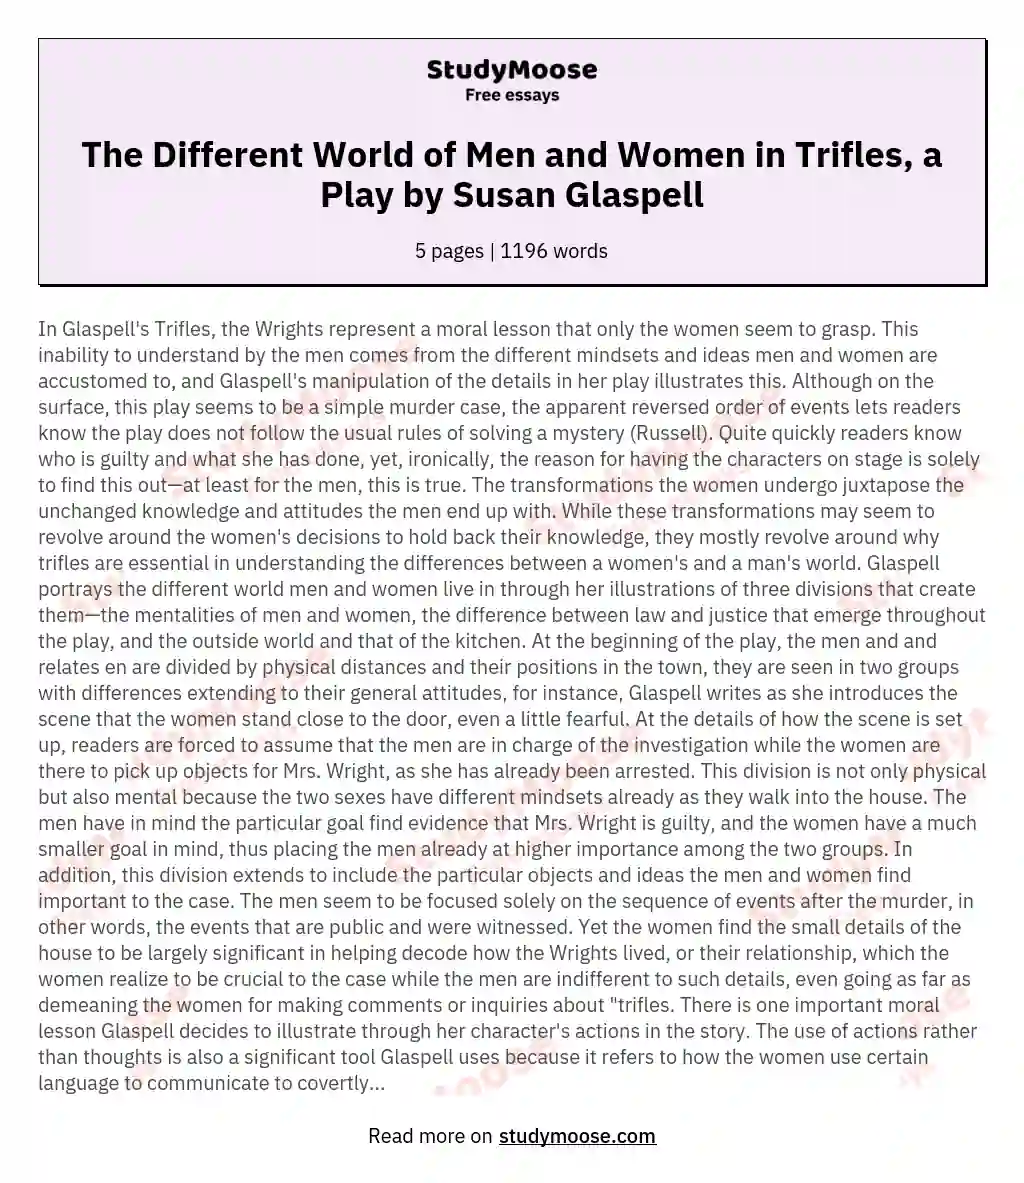 The Different World of Men and Women in Trifles, a Play by Susan Glaspell essay